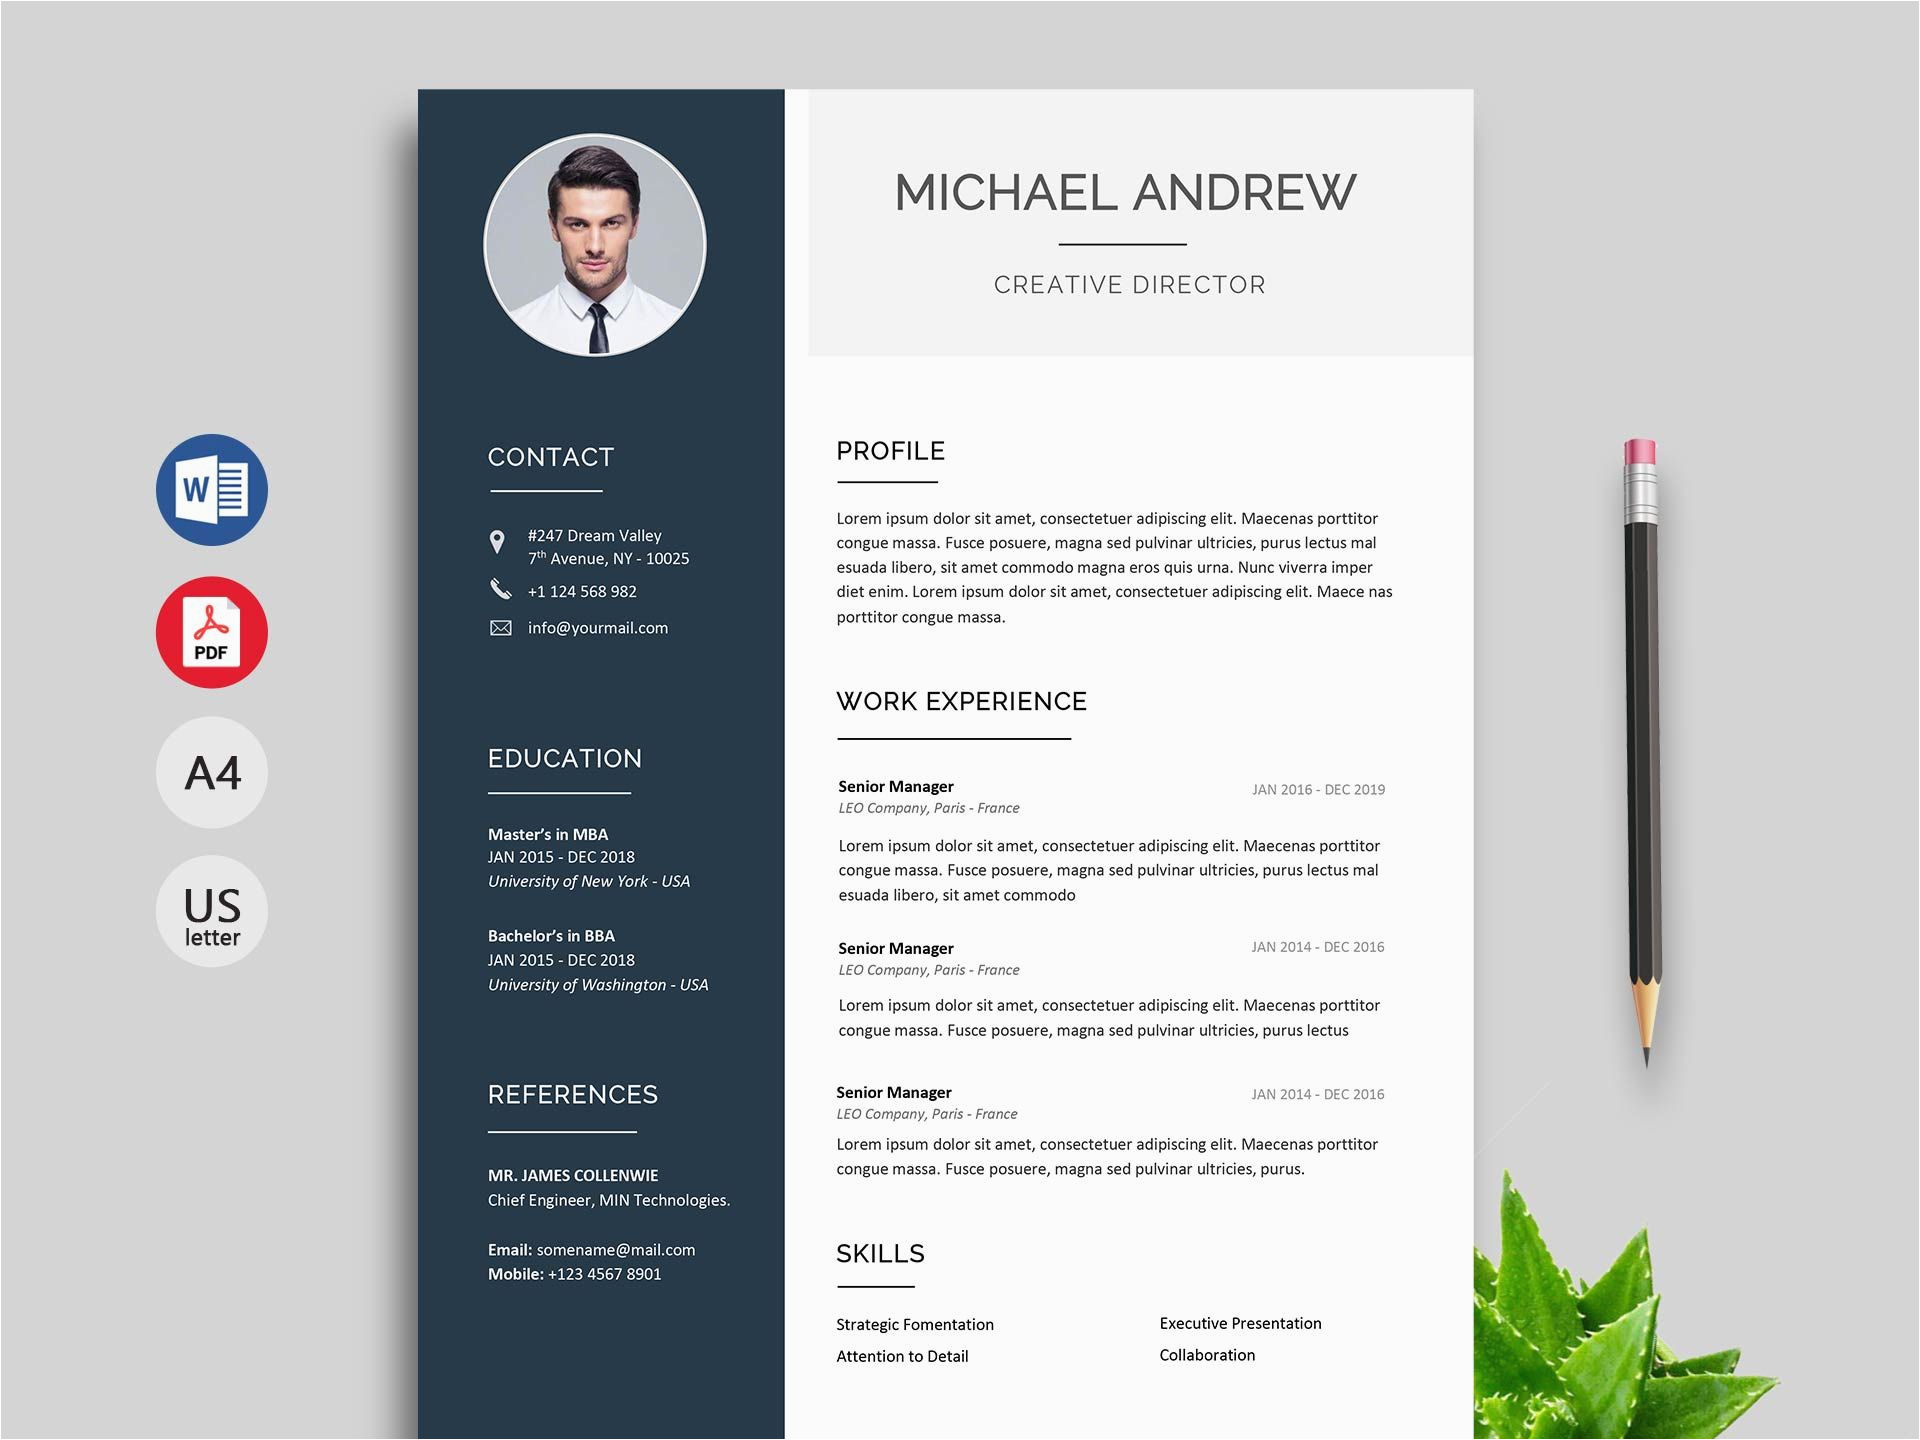 Professional Resume Templates 2022 Free Download 150 Creative Resume & Cv Template Free Download 2020